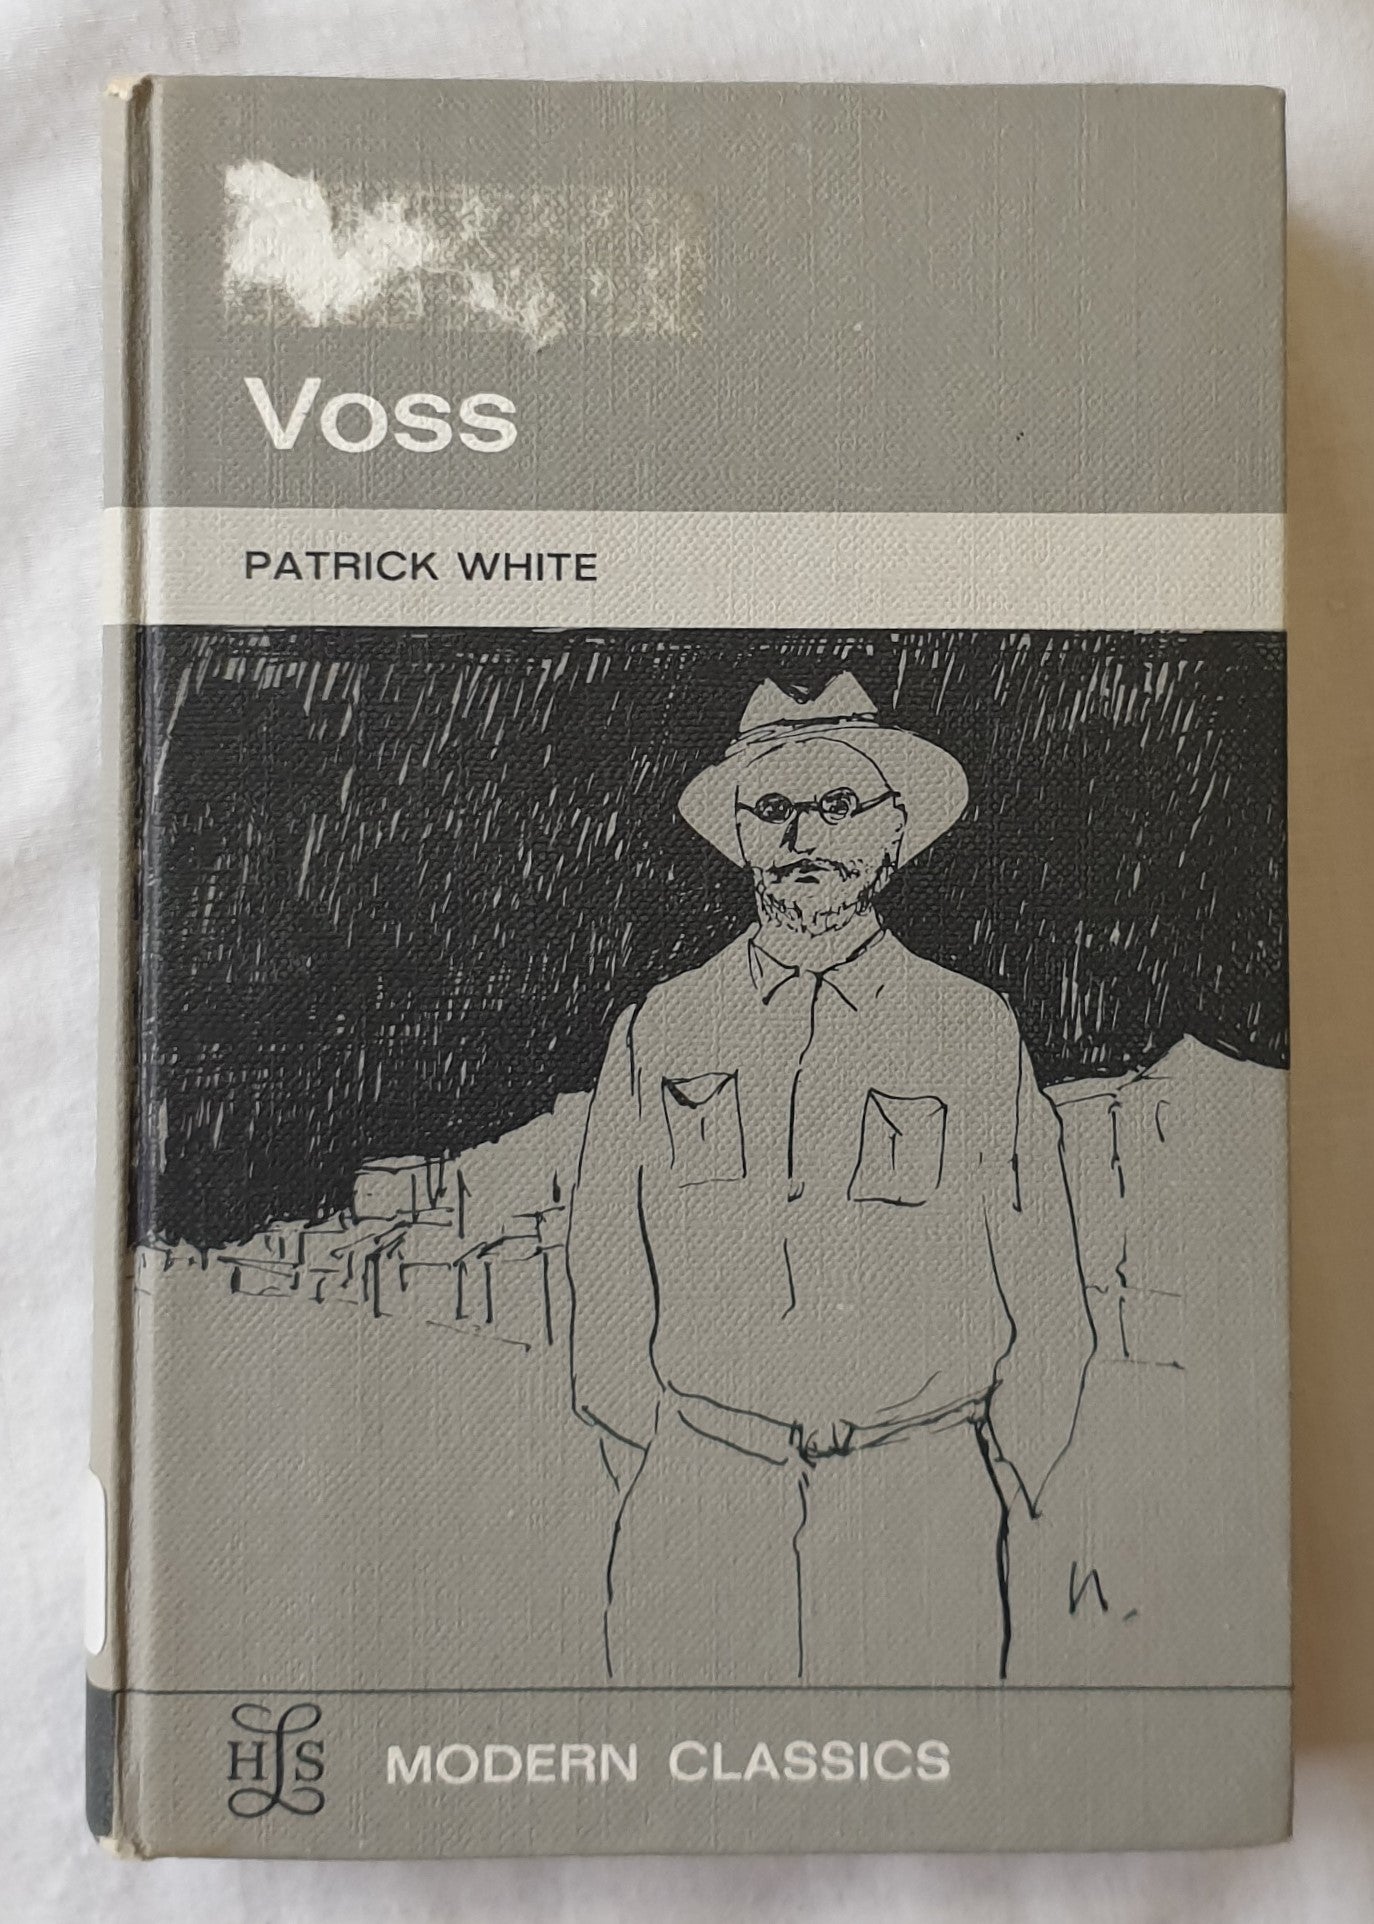 Voss  by Patrick White  (The Heritage of Literature Series Section B No. 79)